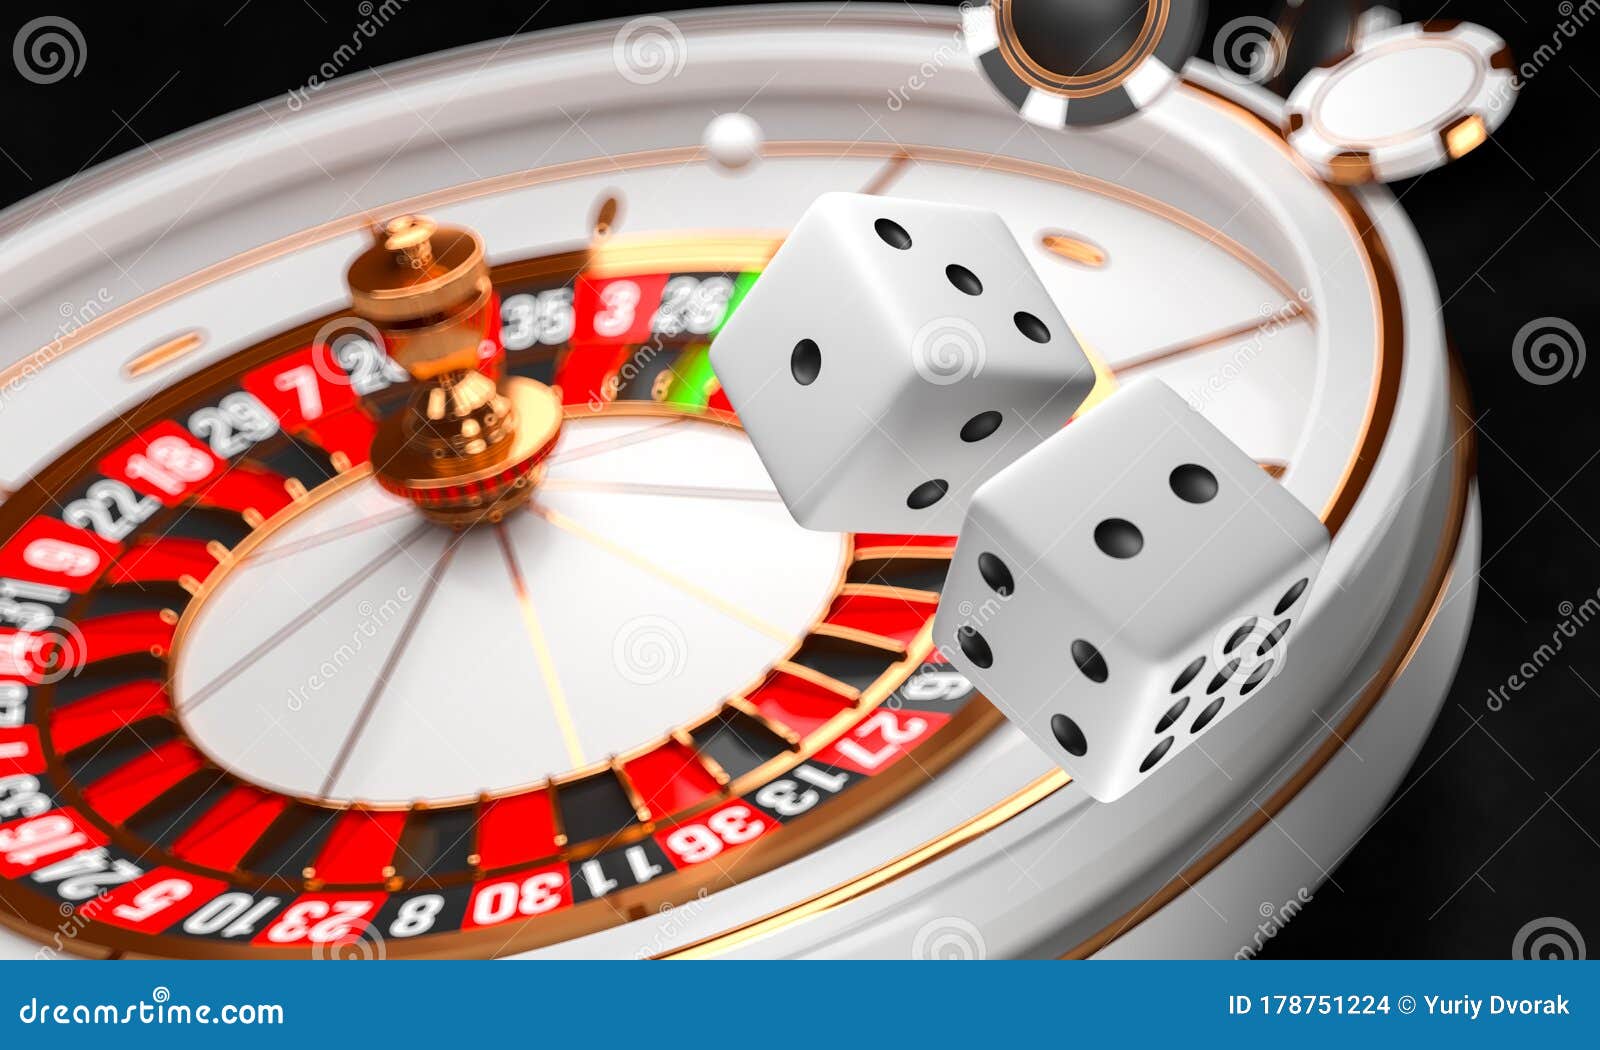 What Your Customers Really Think About Your casino?